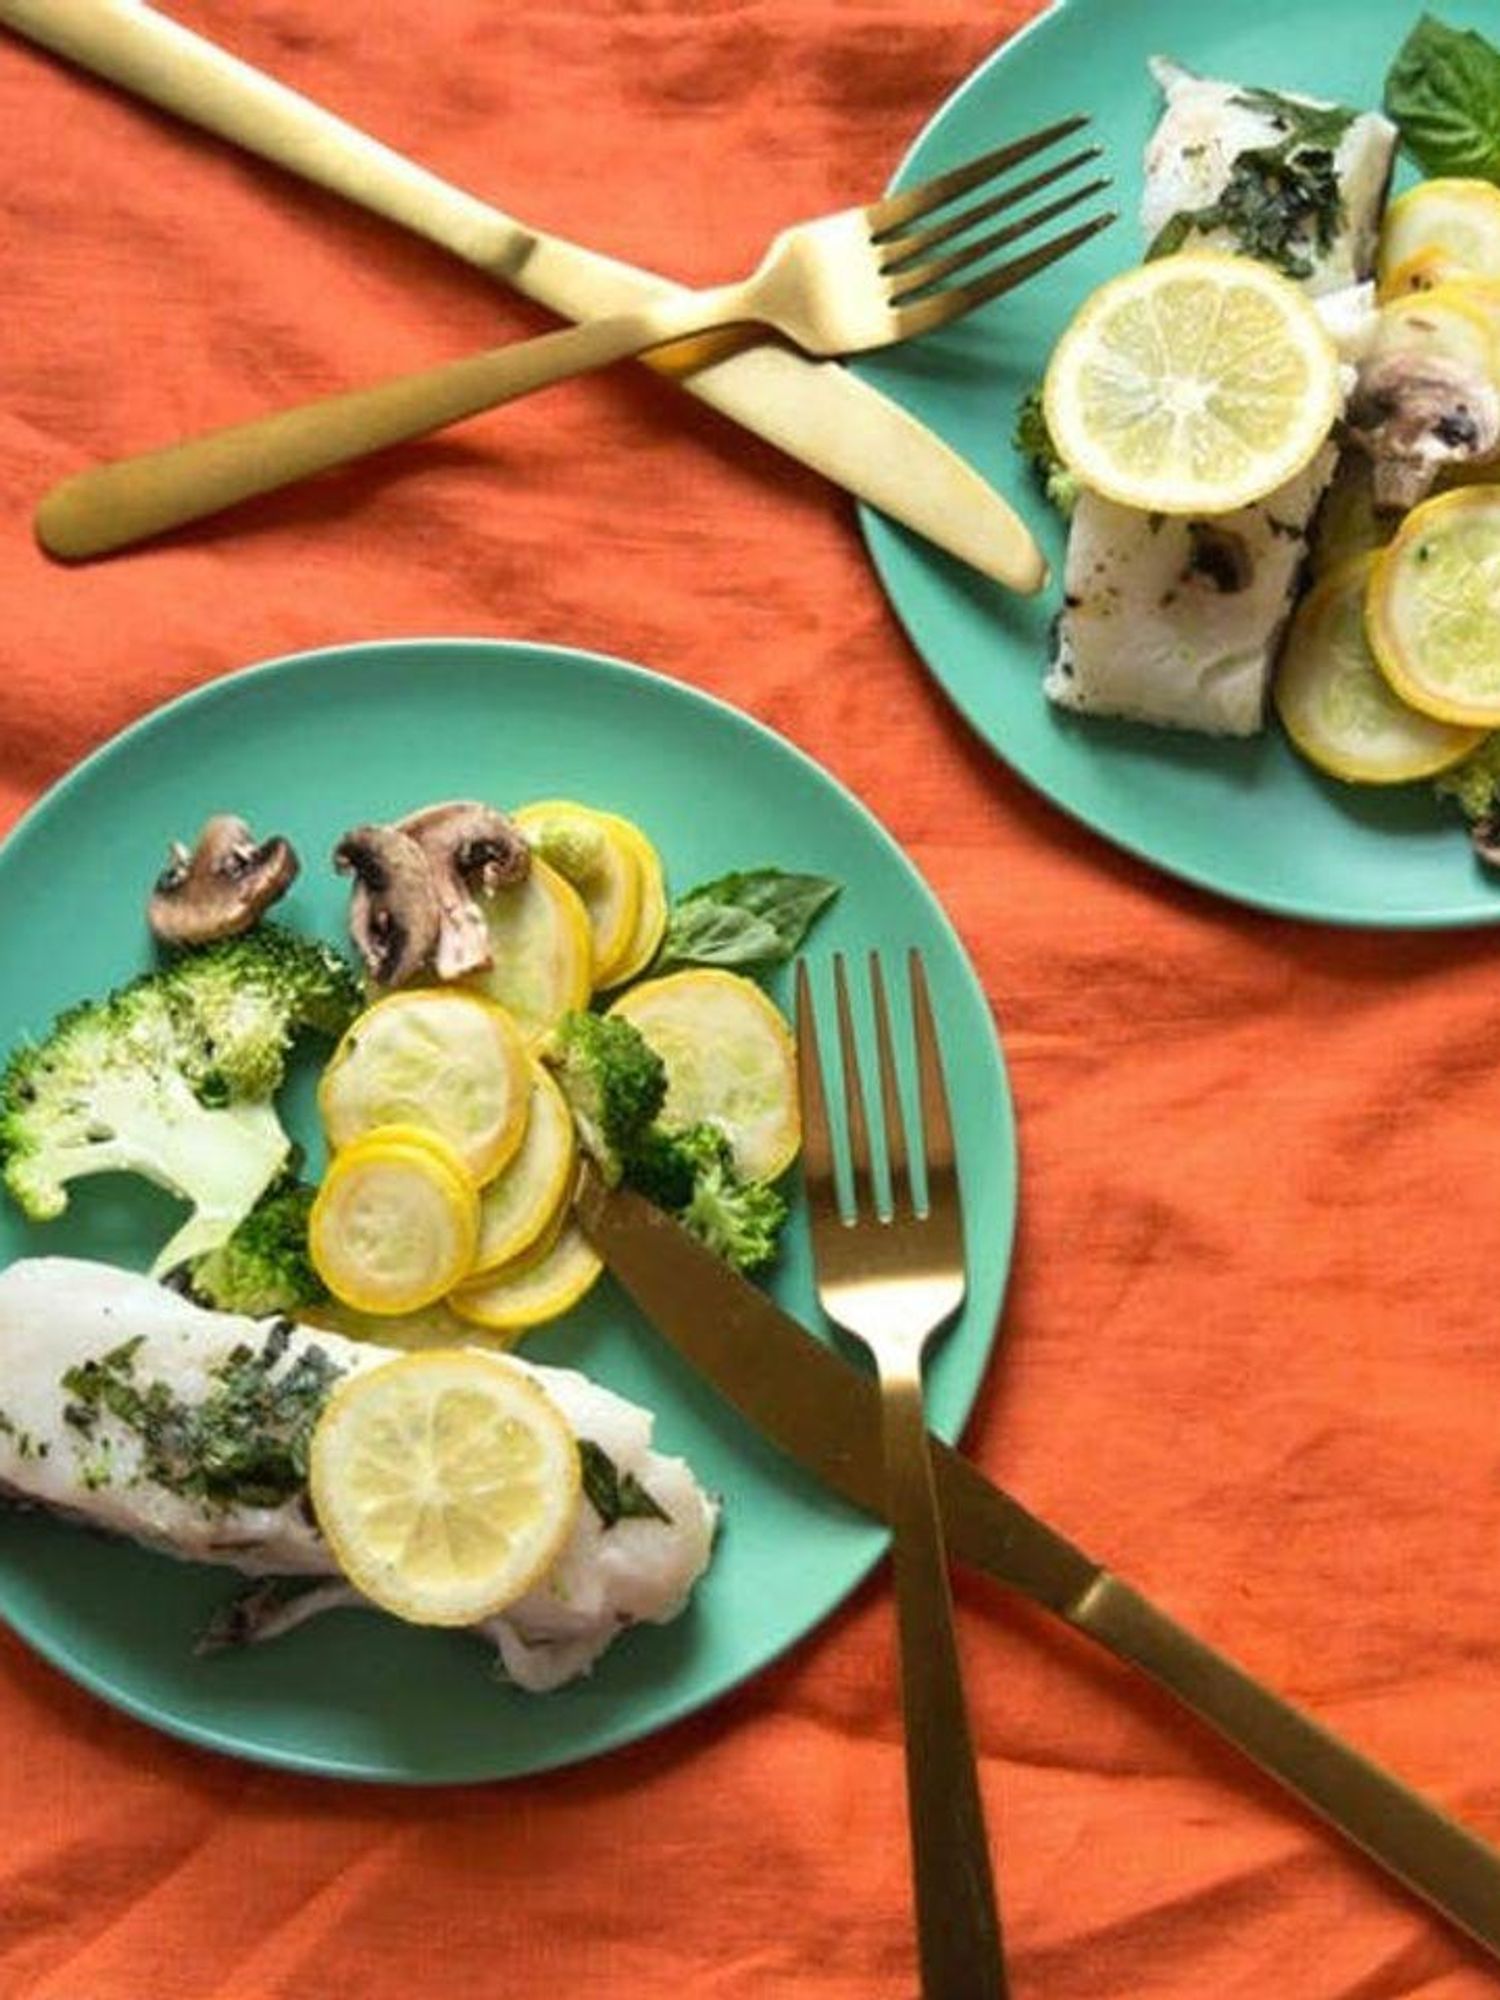 Steamed Sea Bass with Broccoli, Mushrooms, and Summer Squash